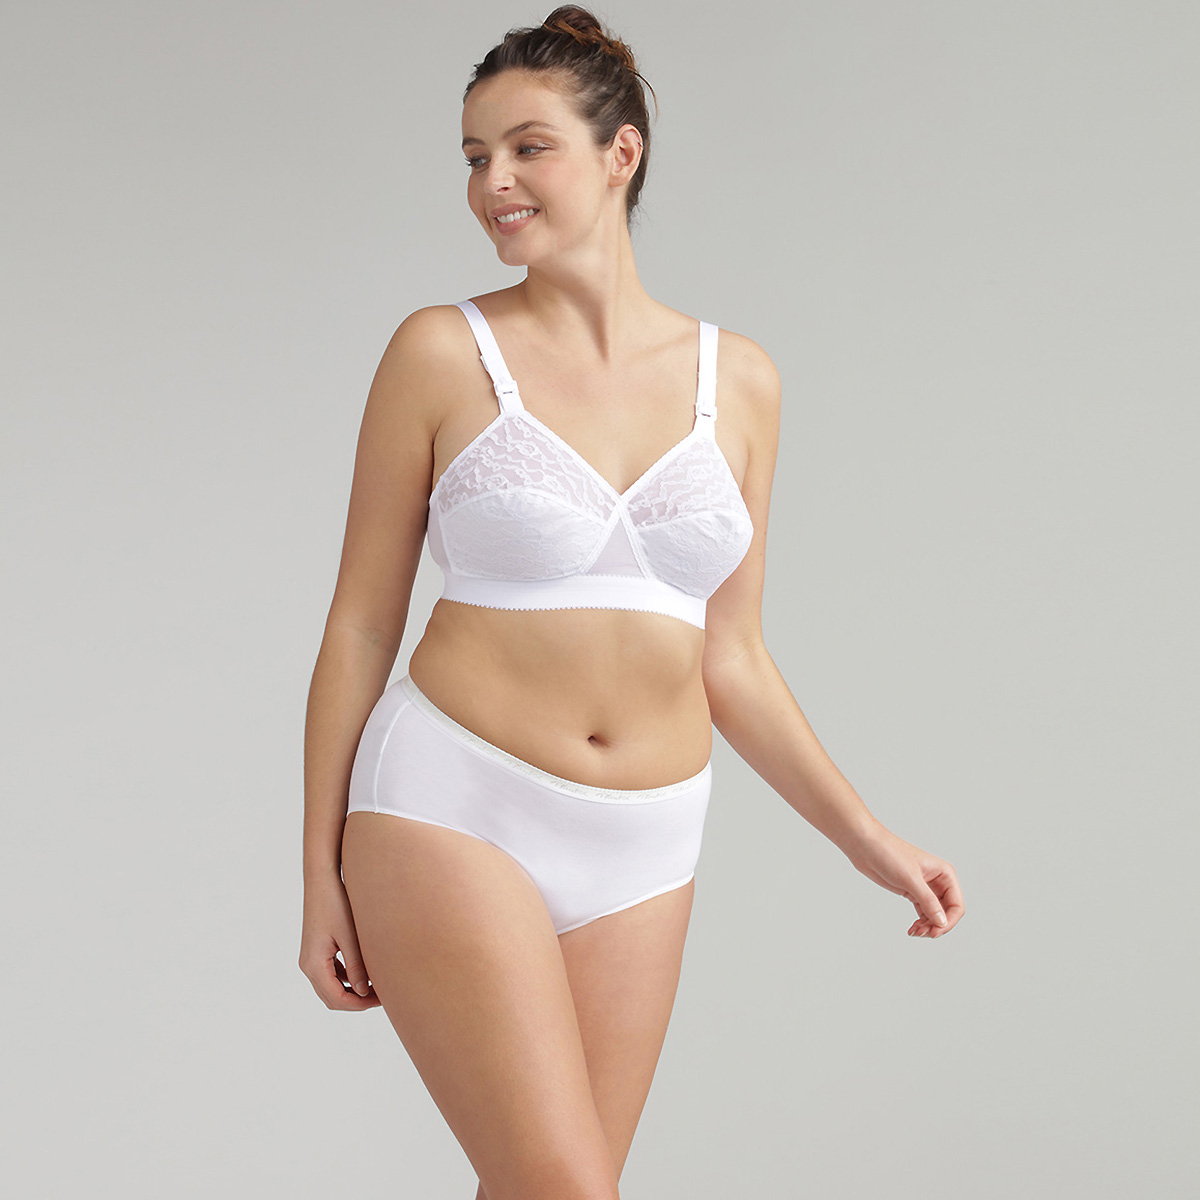 Playtex Cross Your Heart Non-Wired Bra Twin pack P0165 2 x Bras  White